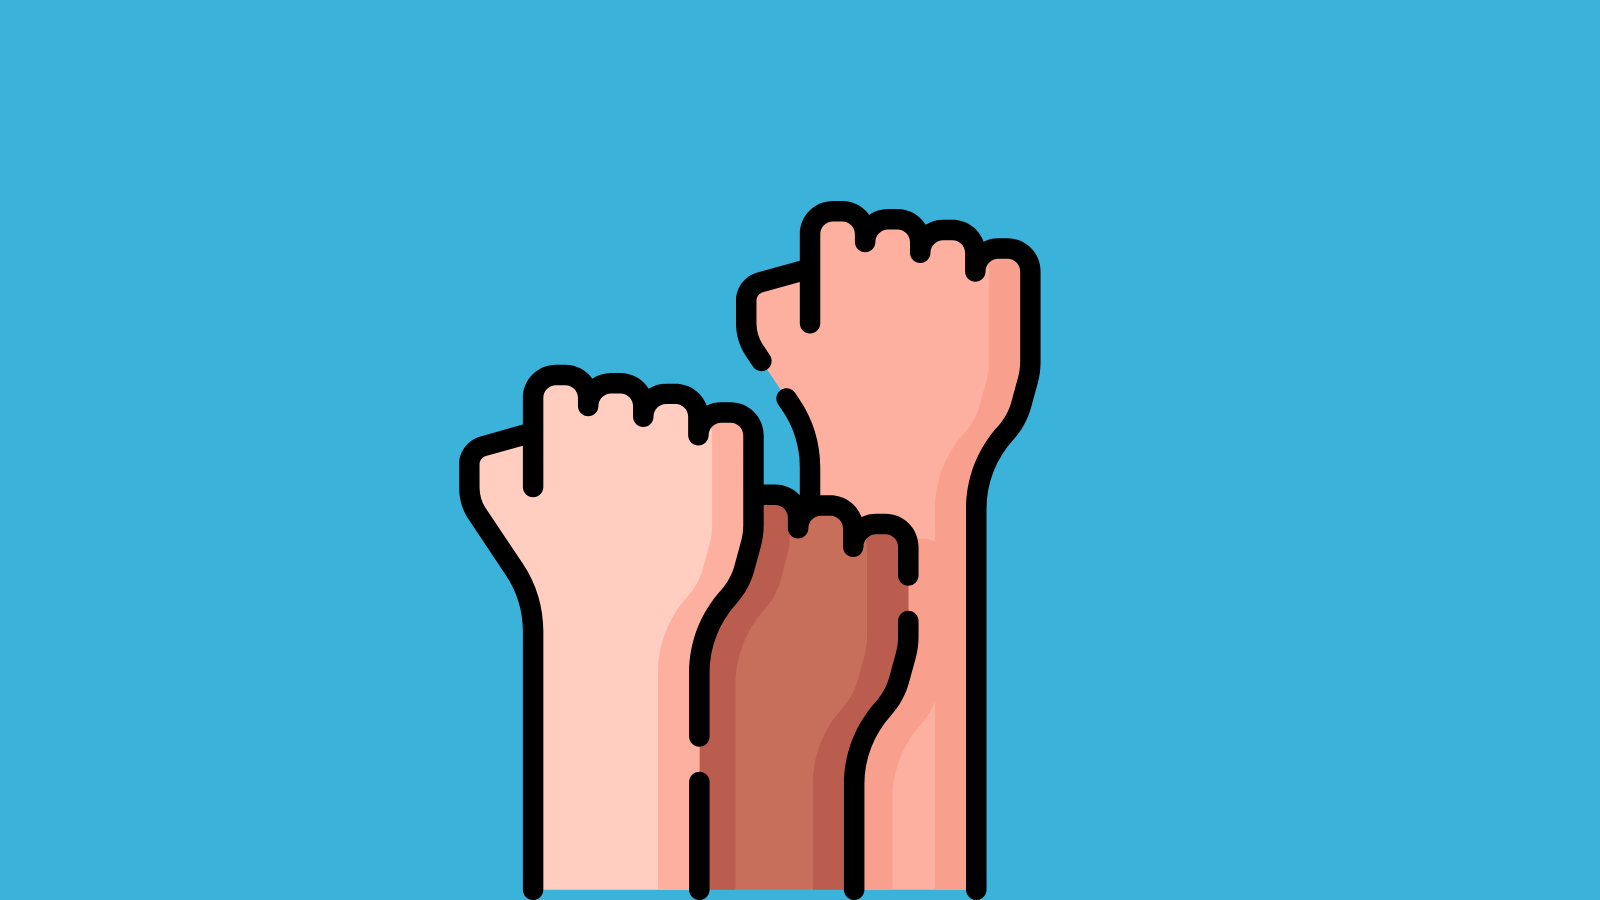 Three fists of various skin tones raised in the air